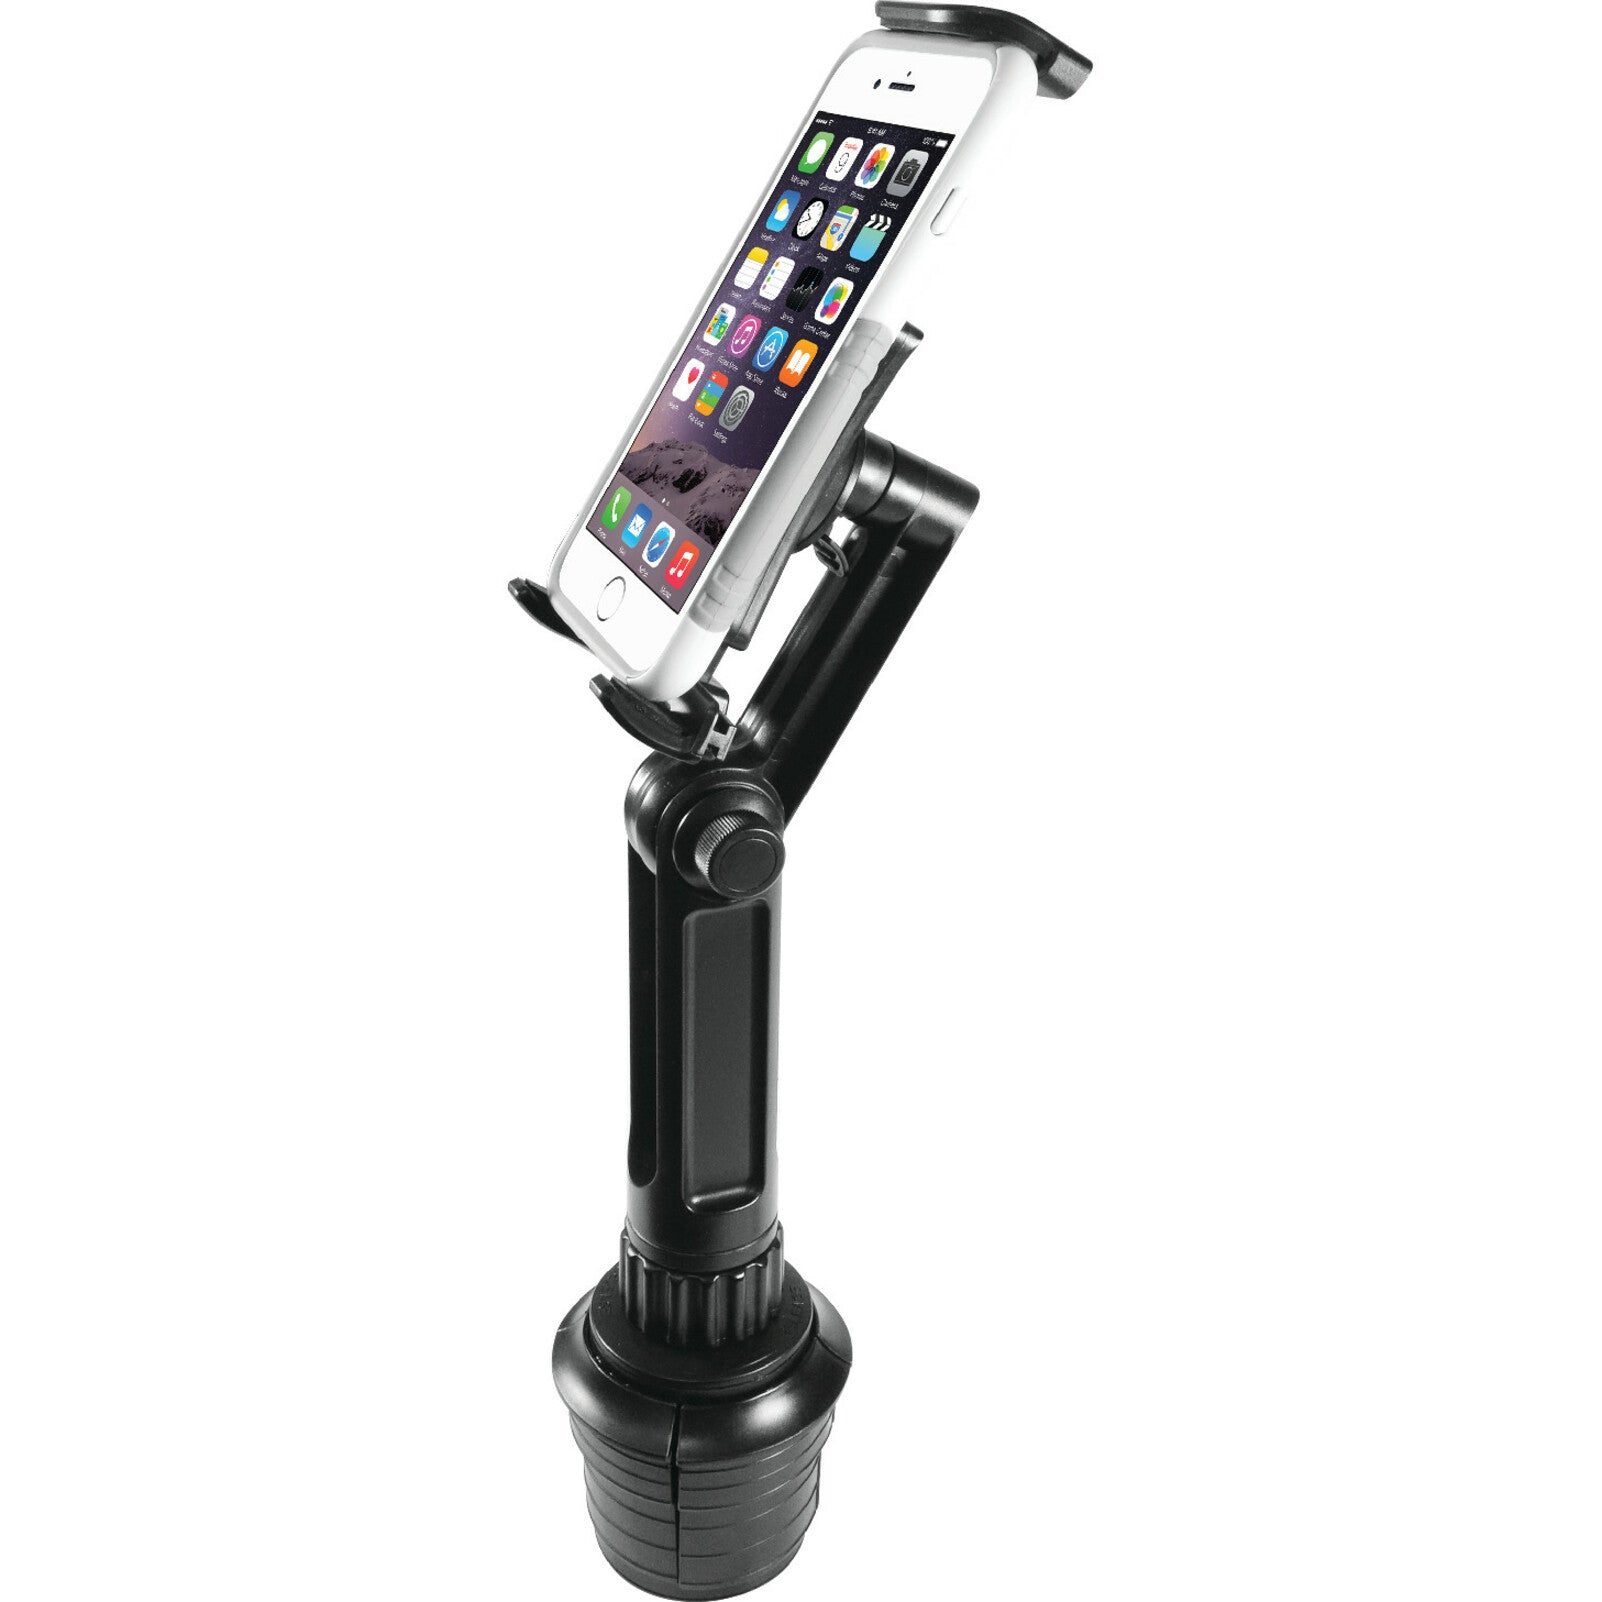 Macally MCUPPRO Smartphone/Tablet Holder, Tilt, Optimal Viewing, Secure, Cushioned Grip, Adjustable, 360° Rotation, Space Saving Design, Expandable Base